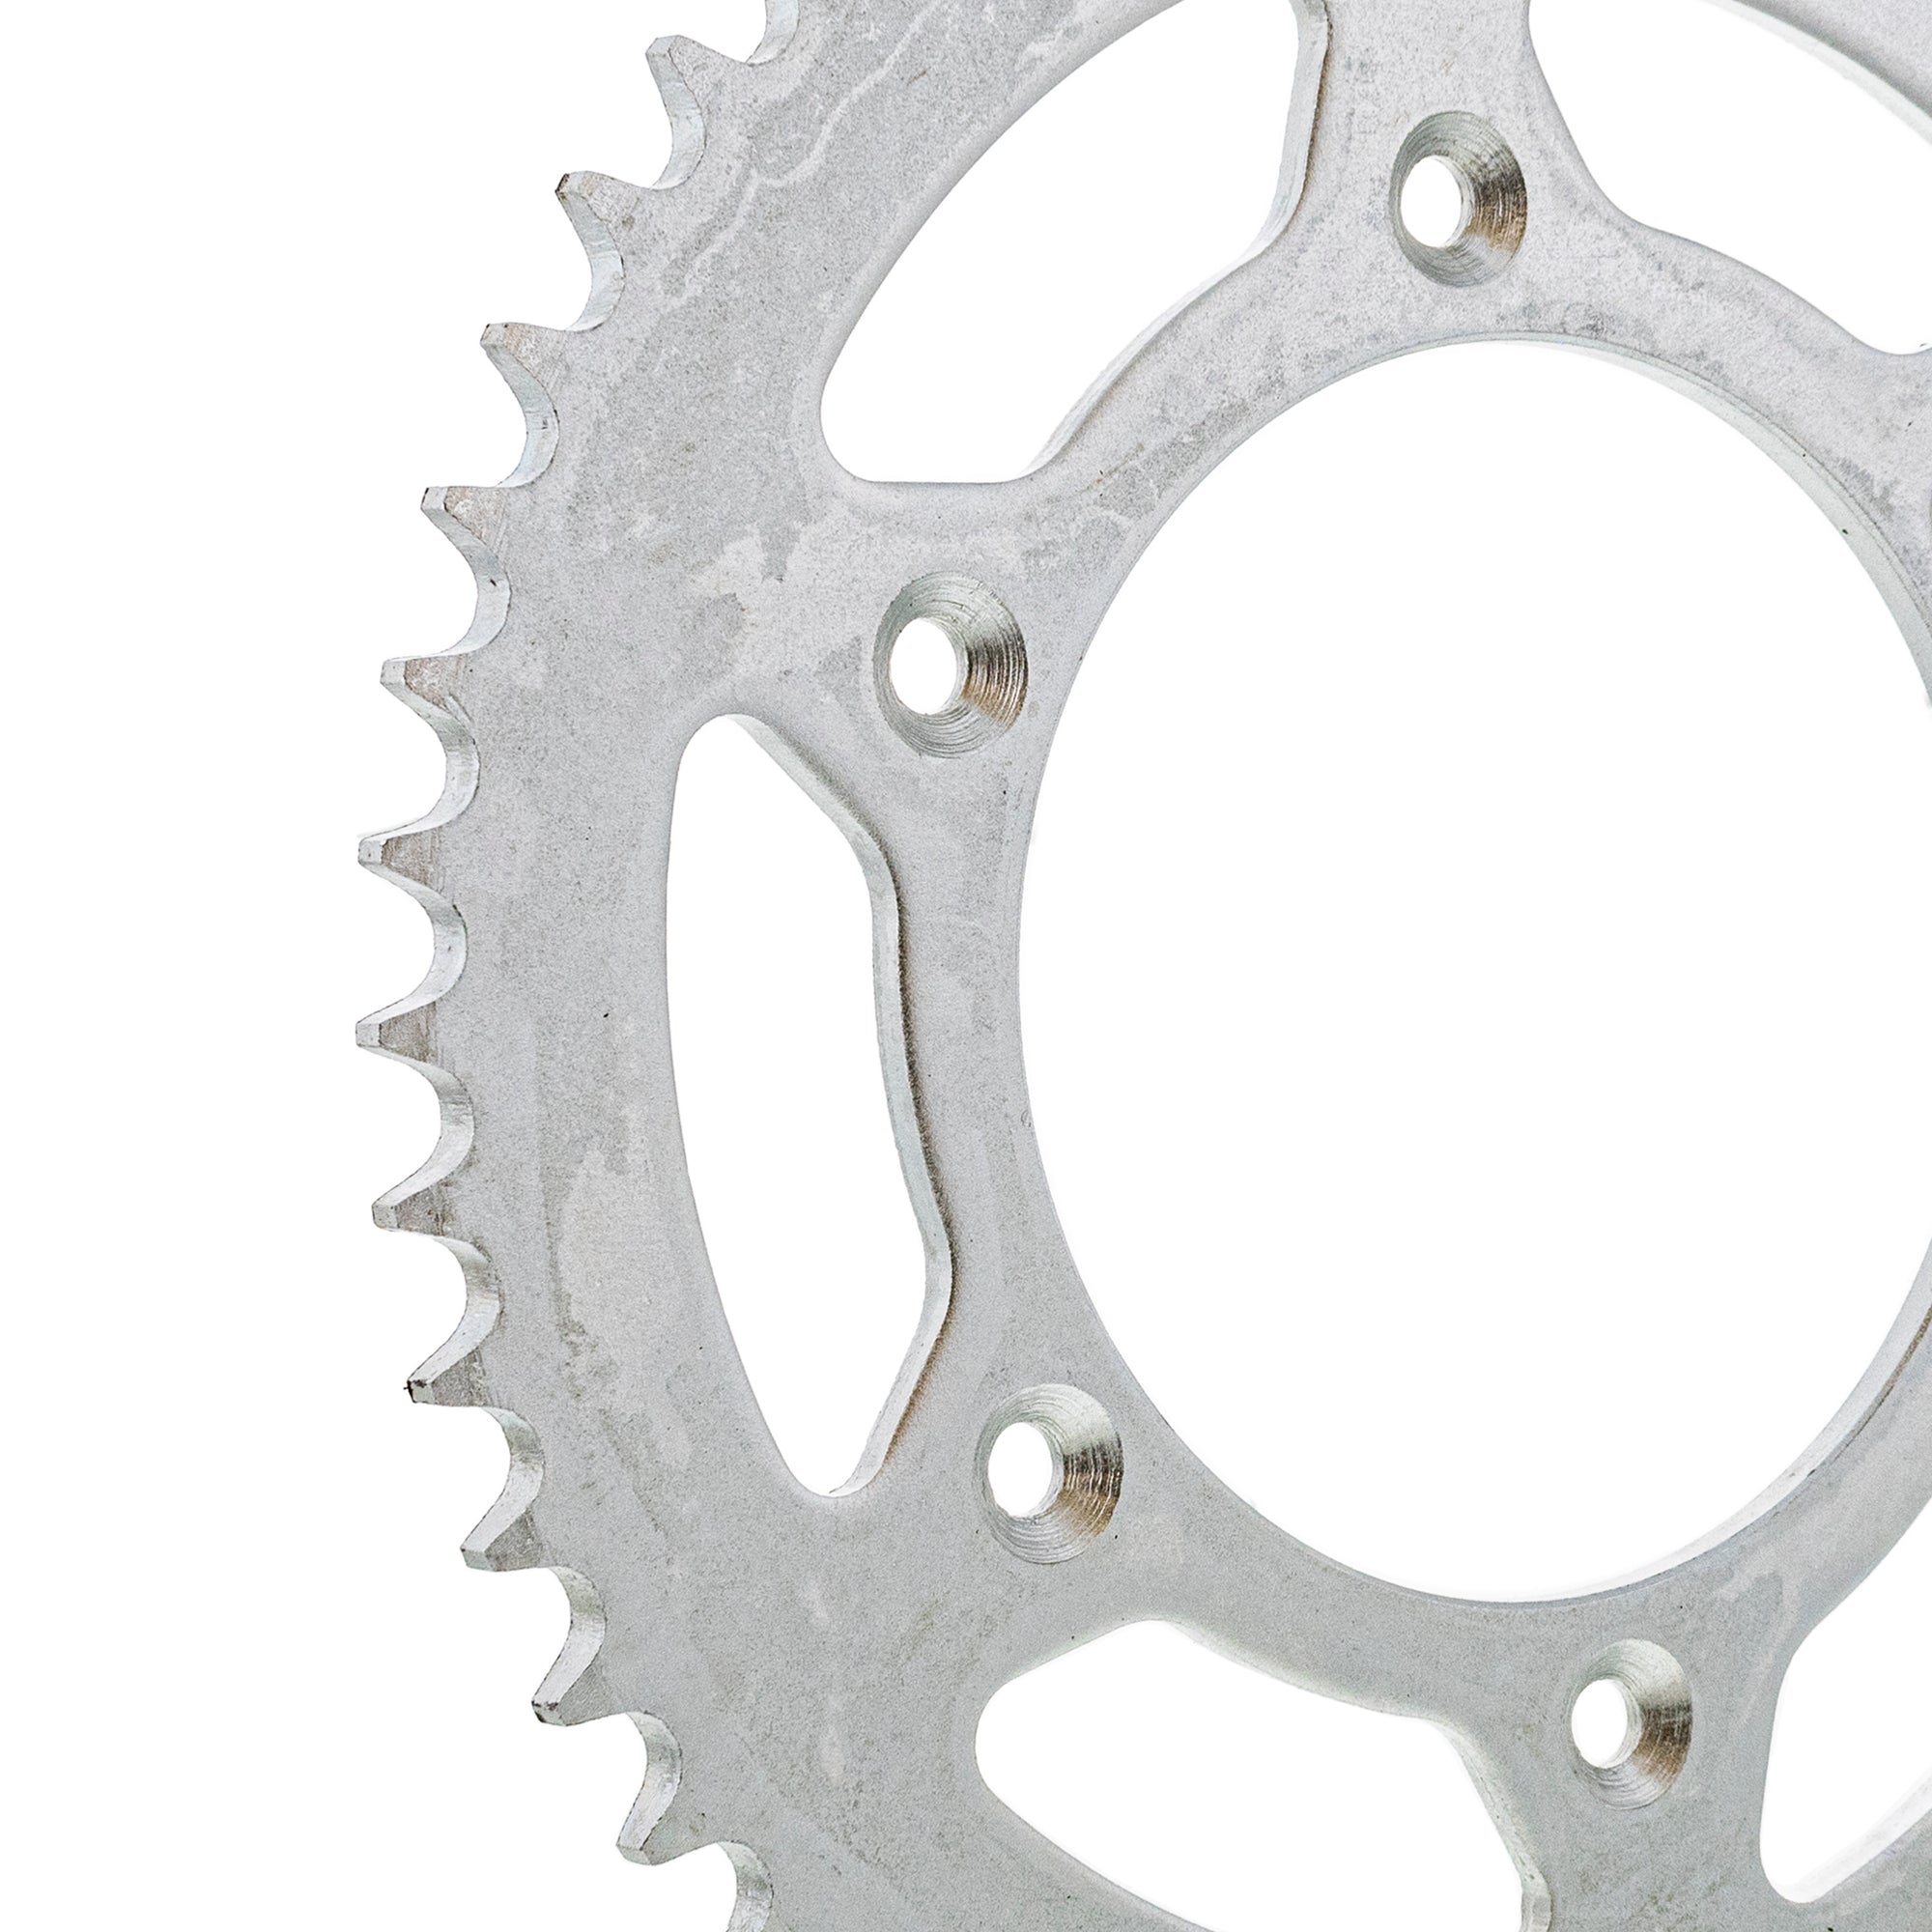 520 Front 13T Rear 51T Drive Sprocket Kit for Honda CRF250R